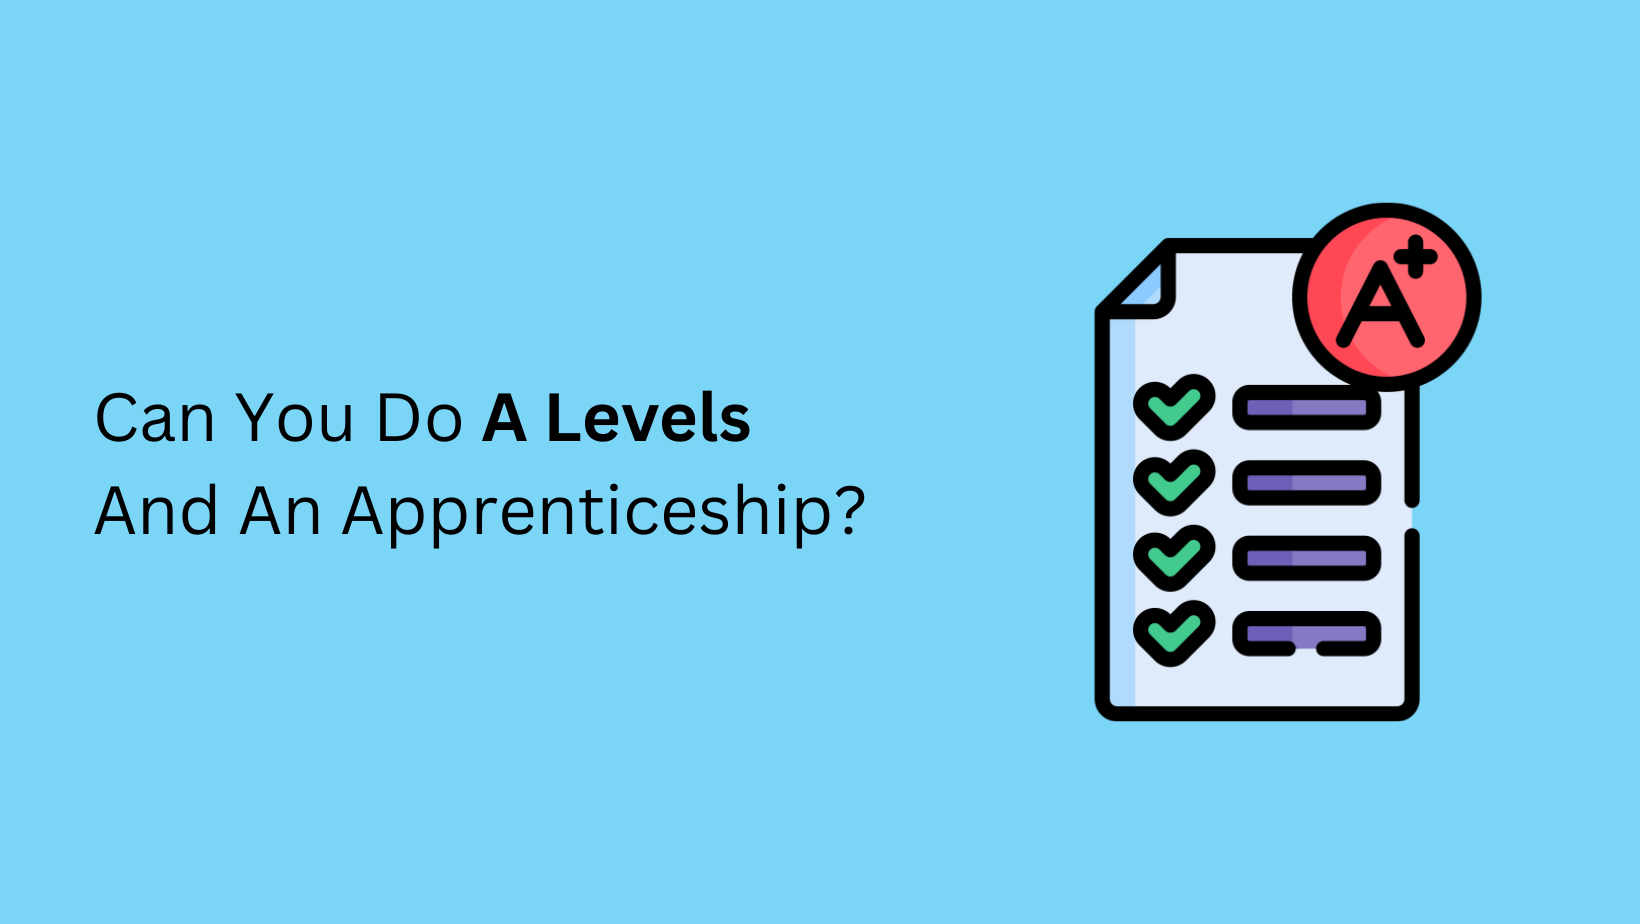 Can You Do A Levels And An Apprenticeship